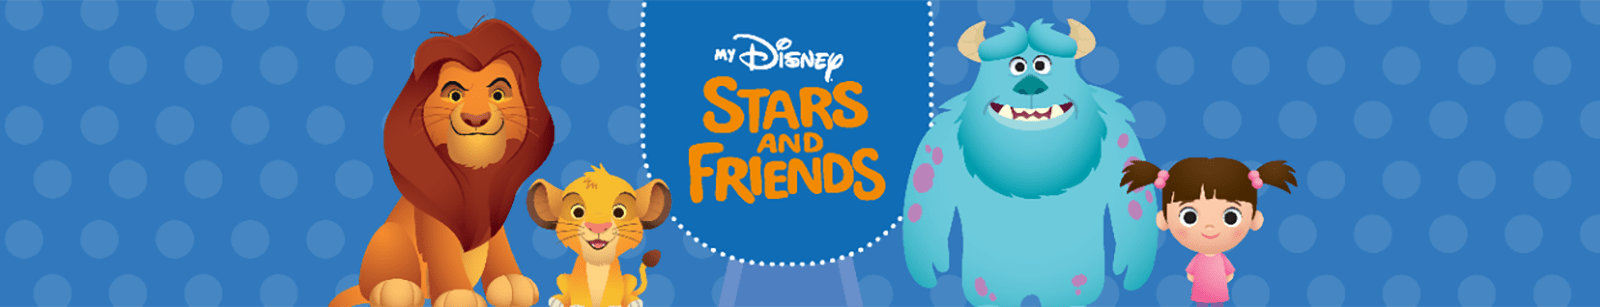 Banner Pearson My Disney Stars and Friends